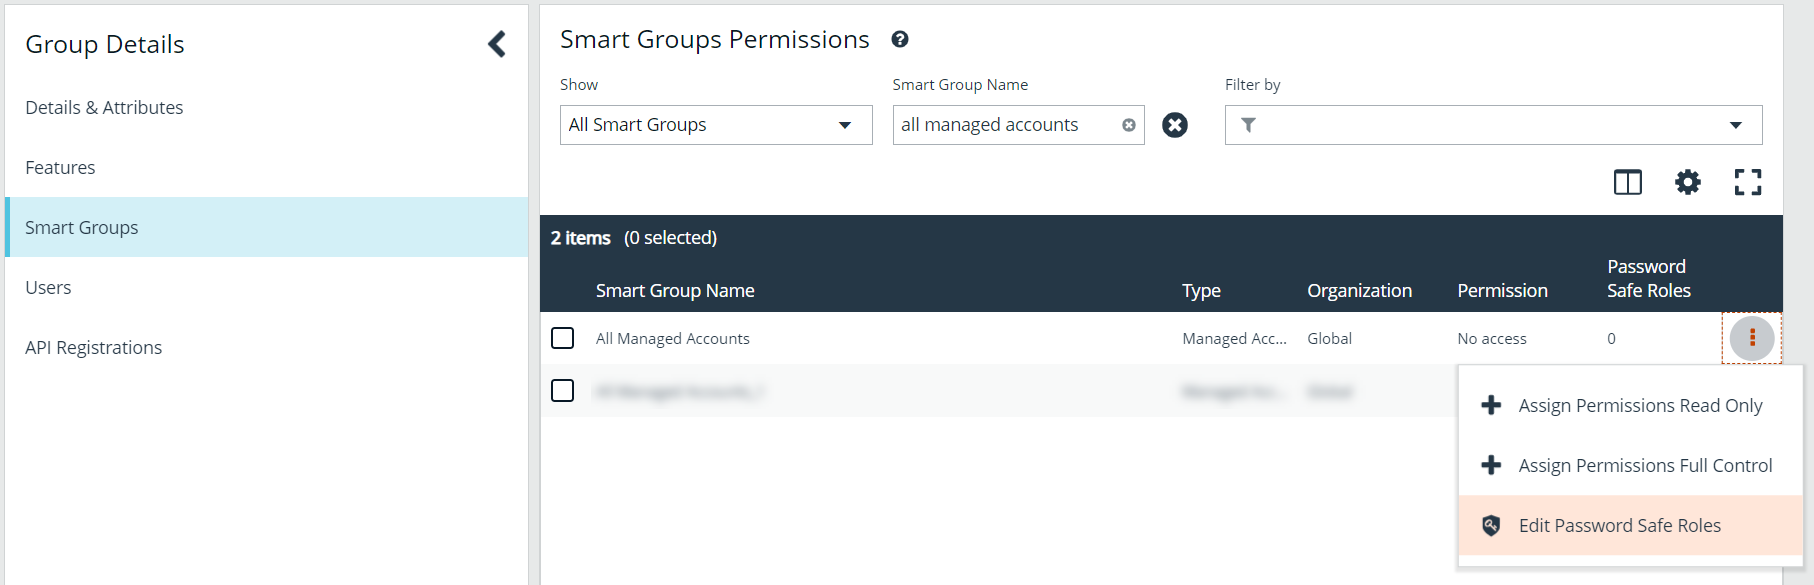 Edit Password Safe Roles for ServiceNow local Group